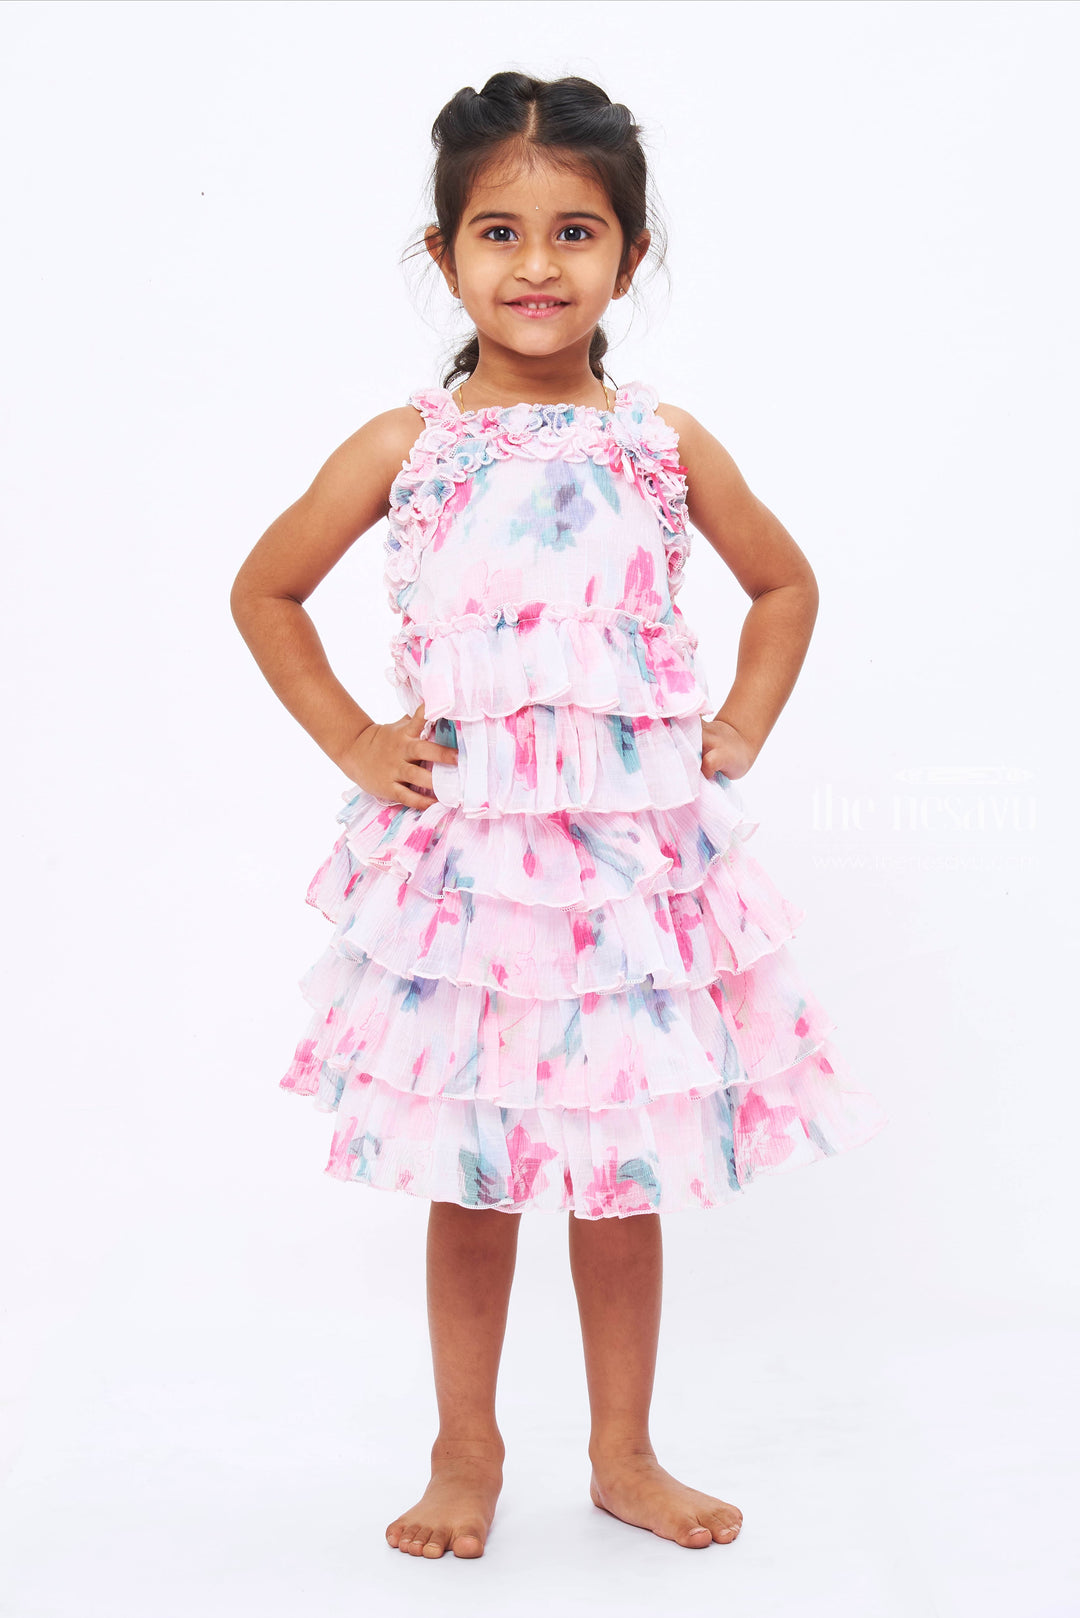 The Nesavu Baby Casual Sets Girls Dreamy Pastel Frill Top and Skirt Set - Enchanting Floral Elegance Nesavu 18 (2Y) / Pink BFJ512B-18 Pastel Floral Frill Top and Skirt Set for Girls | Girls Casual Wear | The Nesavu